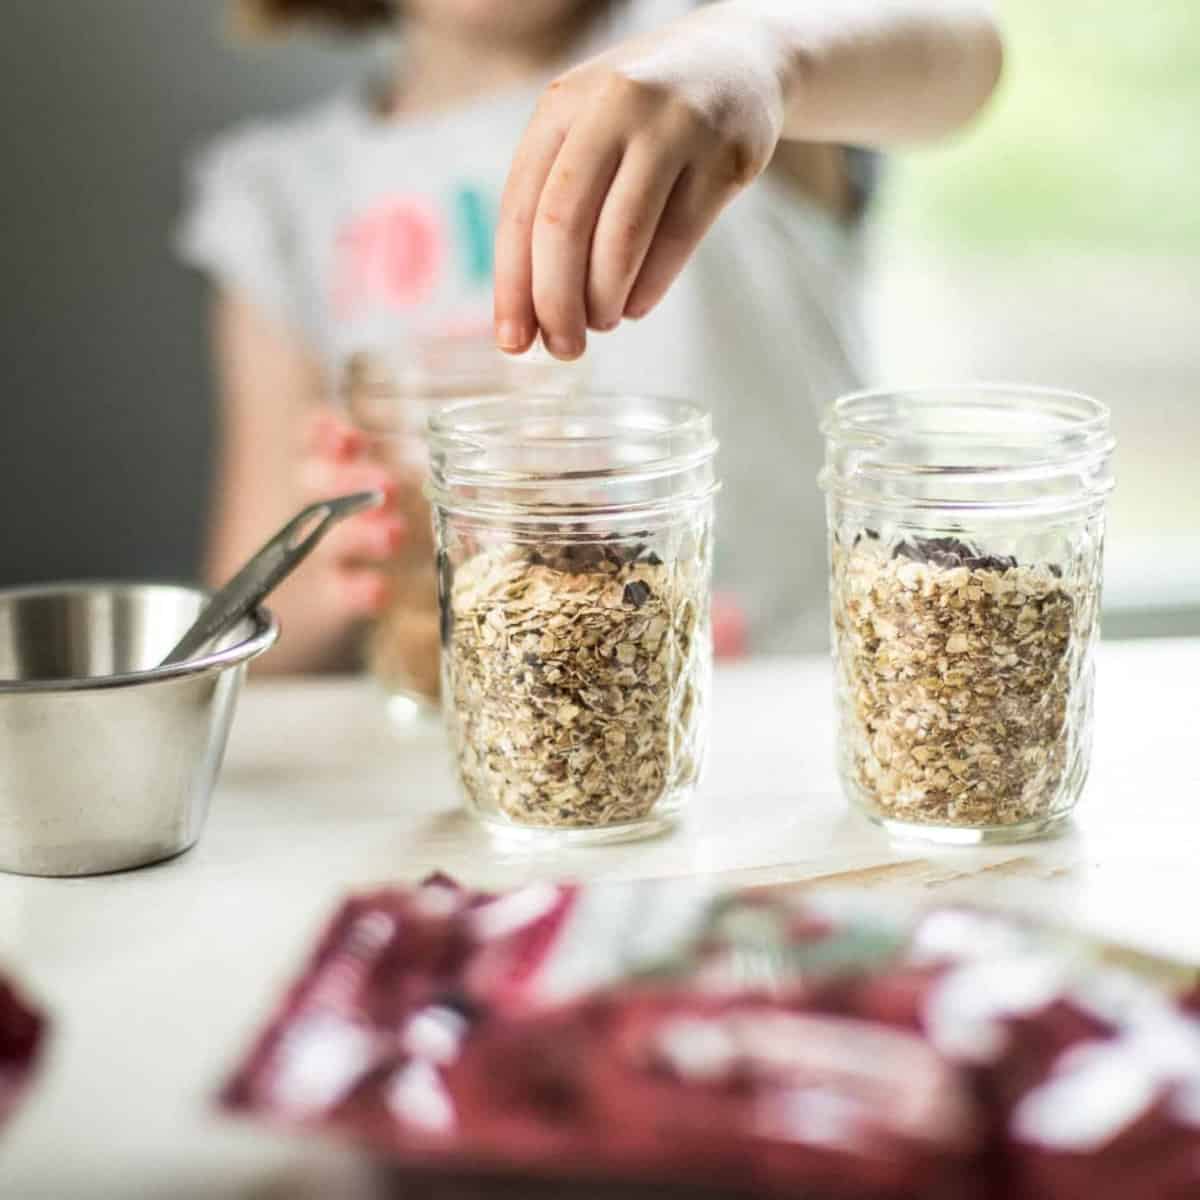 little girl adds a topping to her oatmeal